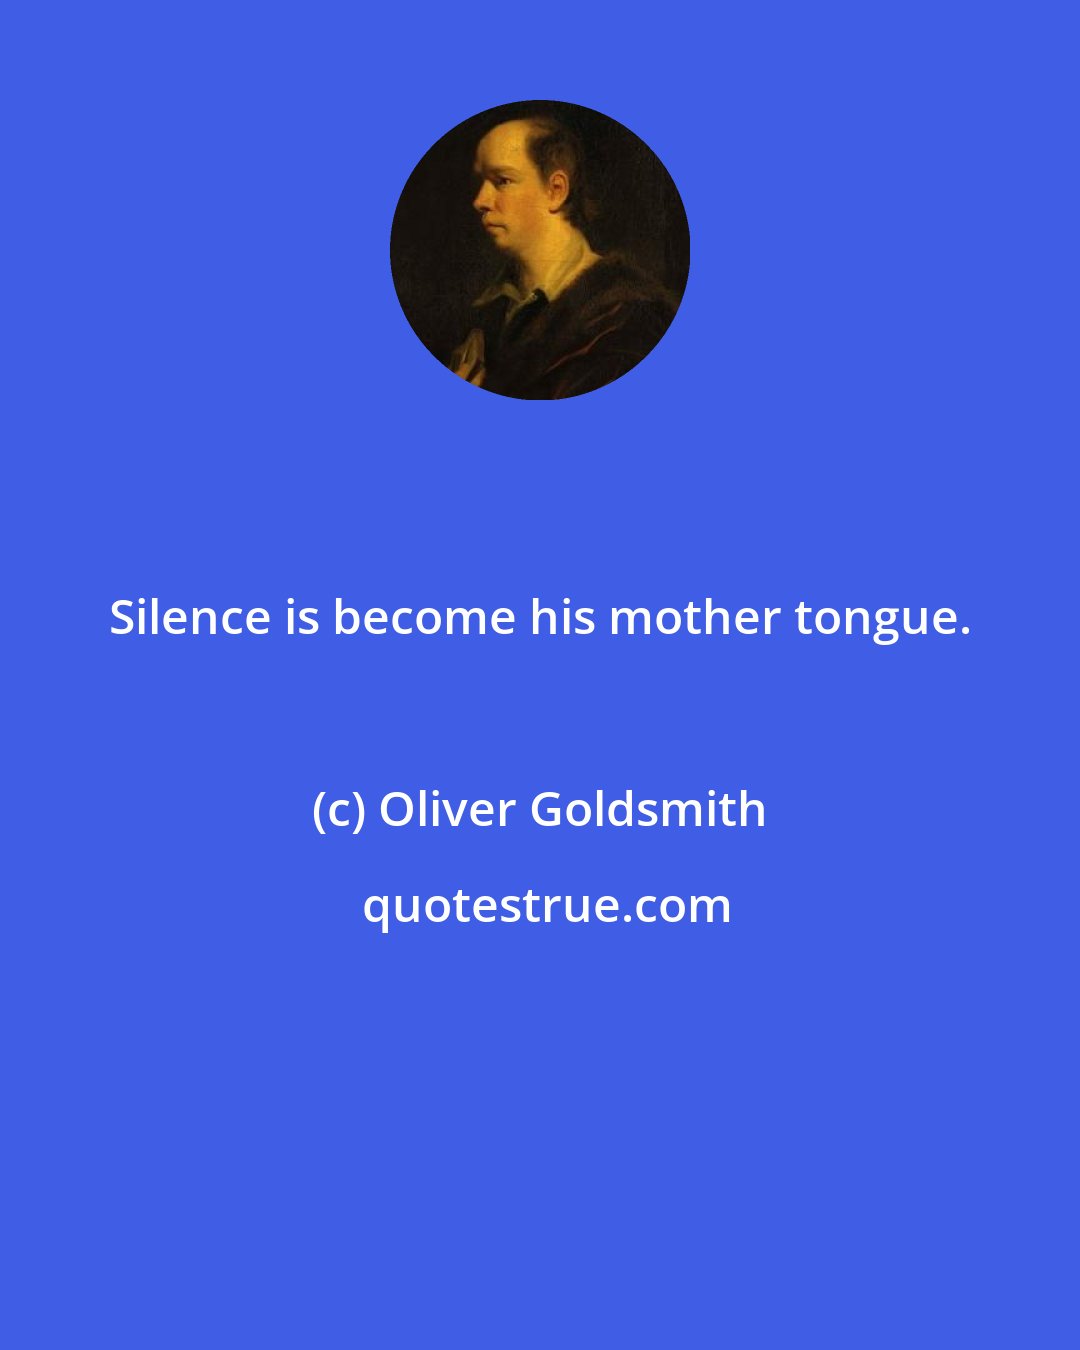 Oliver Goldsmith: Silence is become his mother tongue.